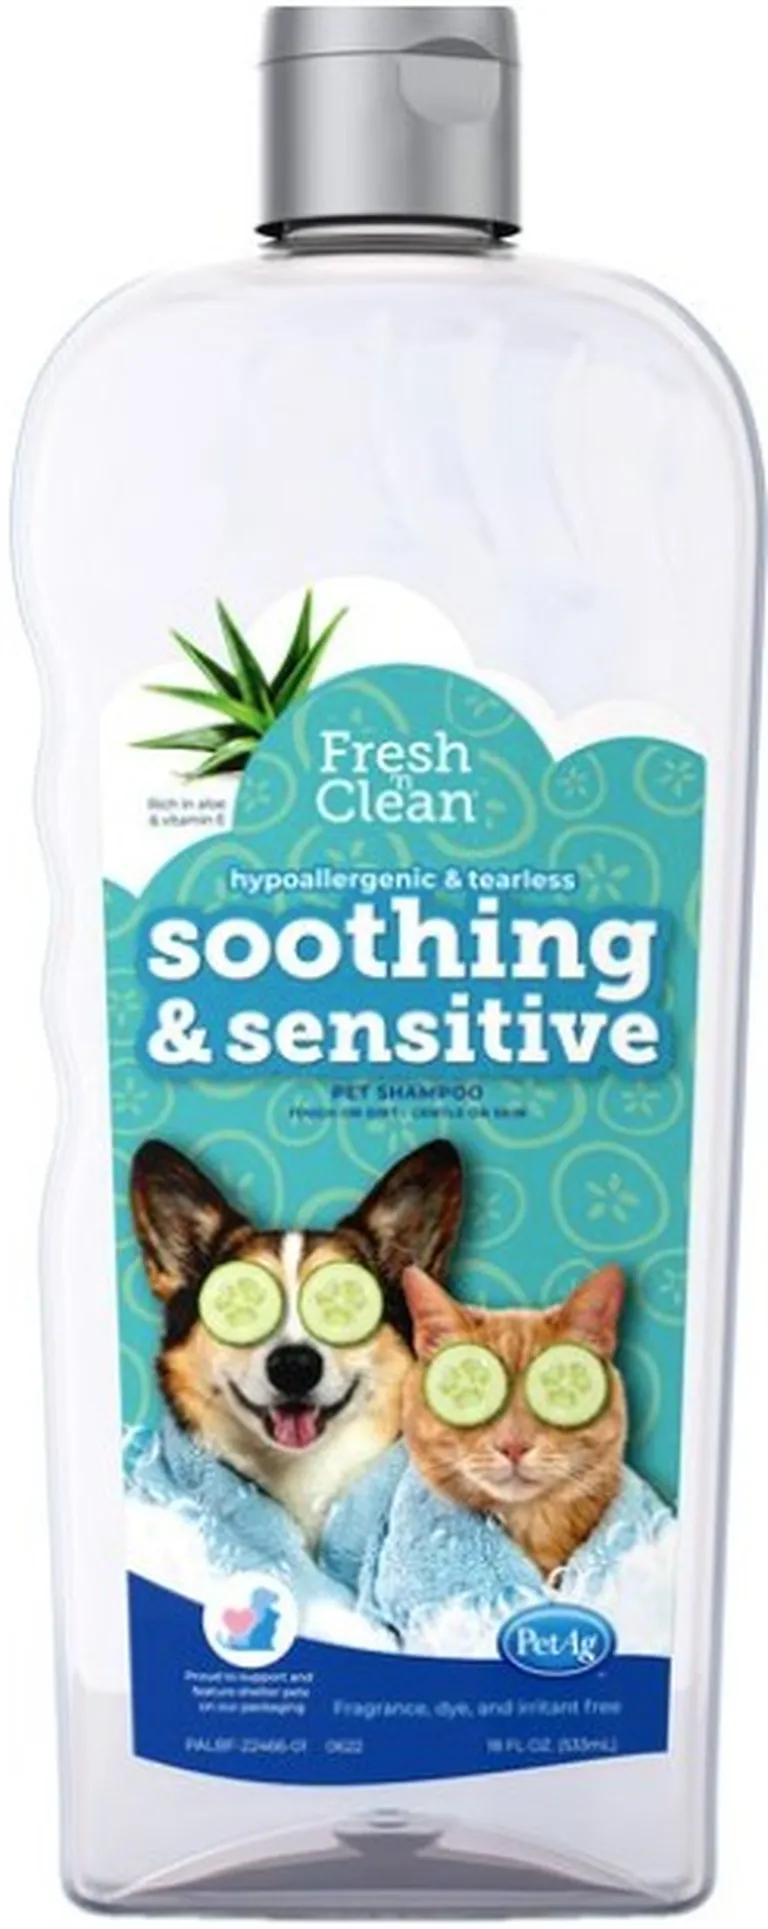 Fresh n Clean Soothing and Sensitive Hypoallergenic Pet Shampoo Photo 1